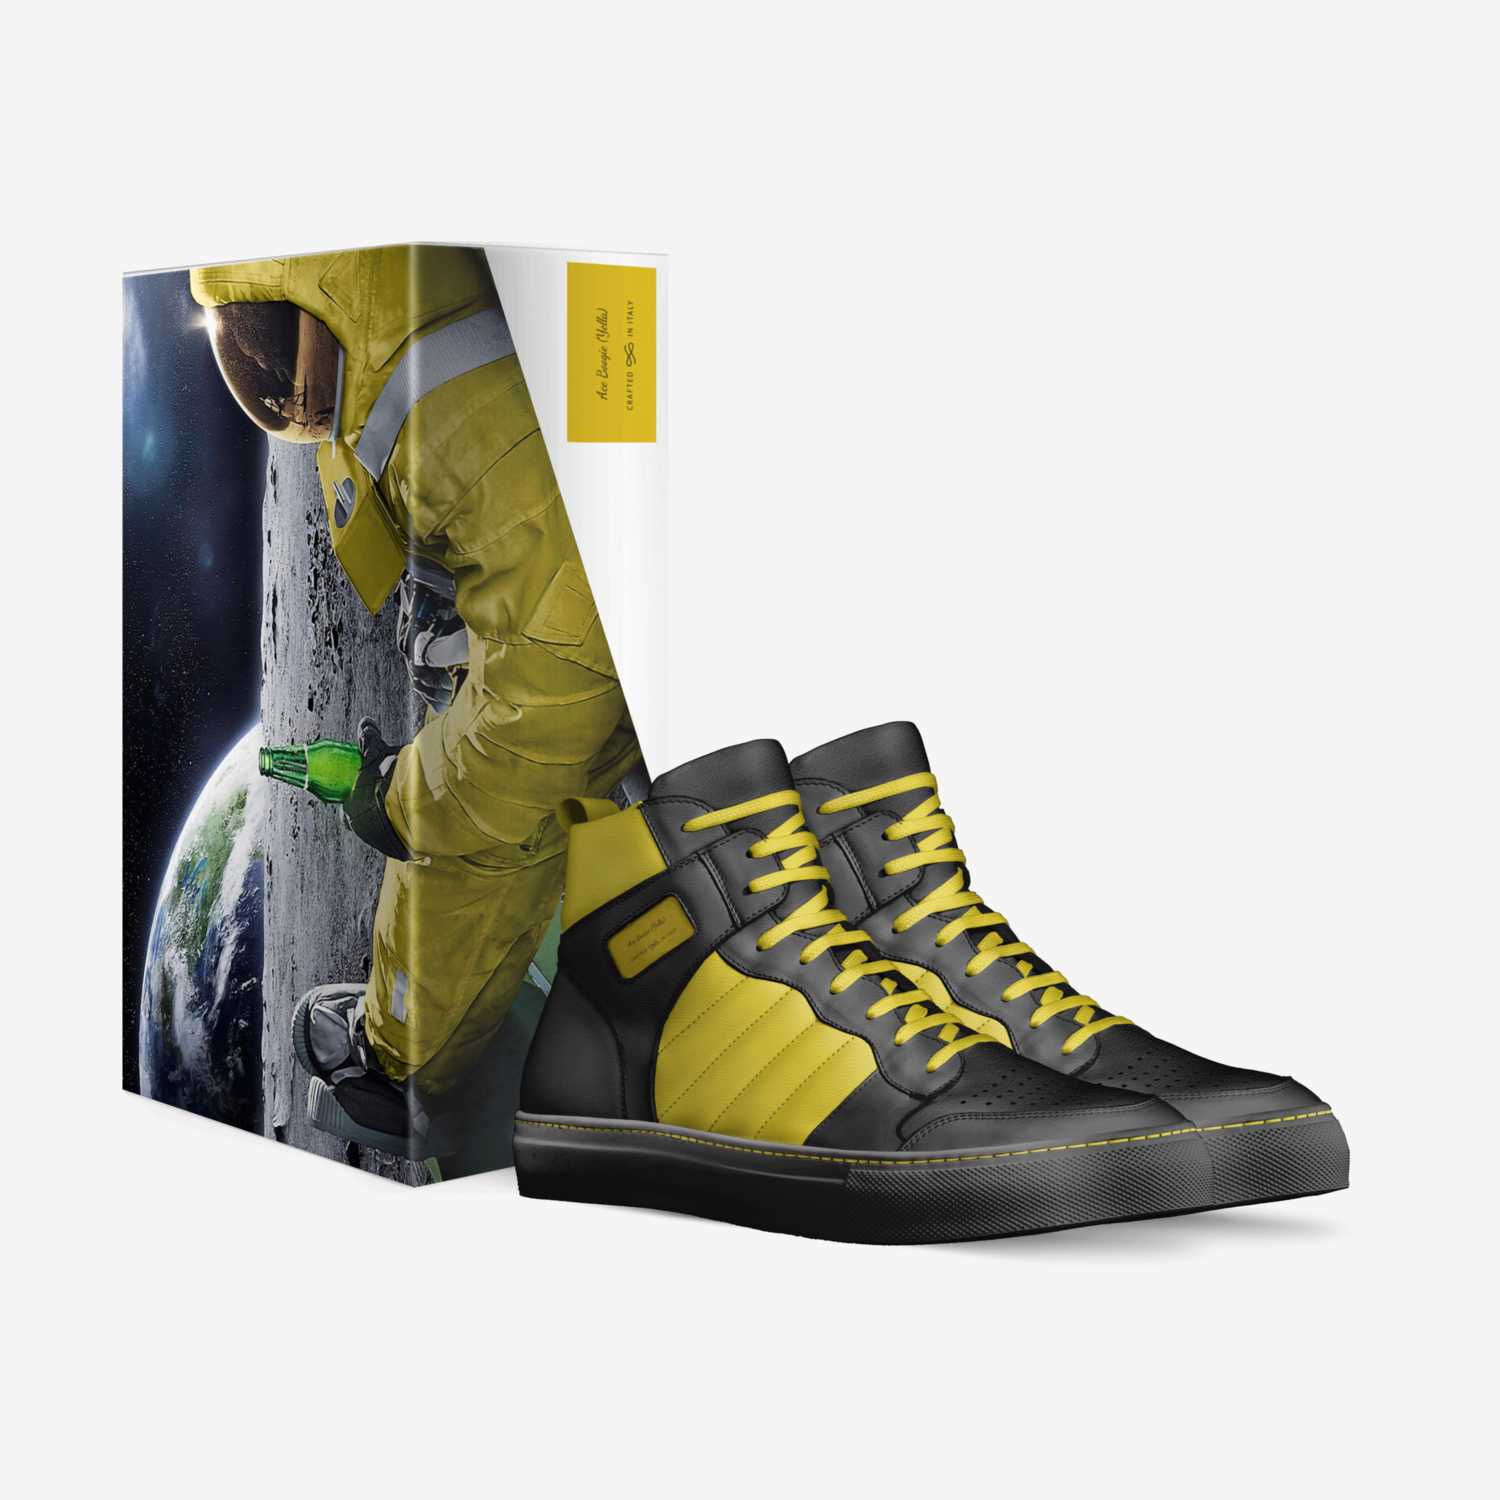 Ace Boogie (yellow) custom made in Italy shoes by Sedric Mcgee | Box view